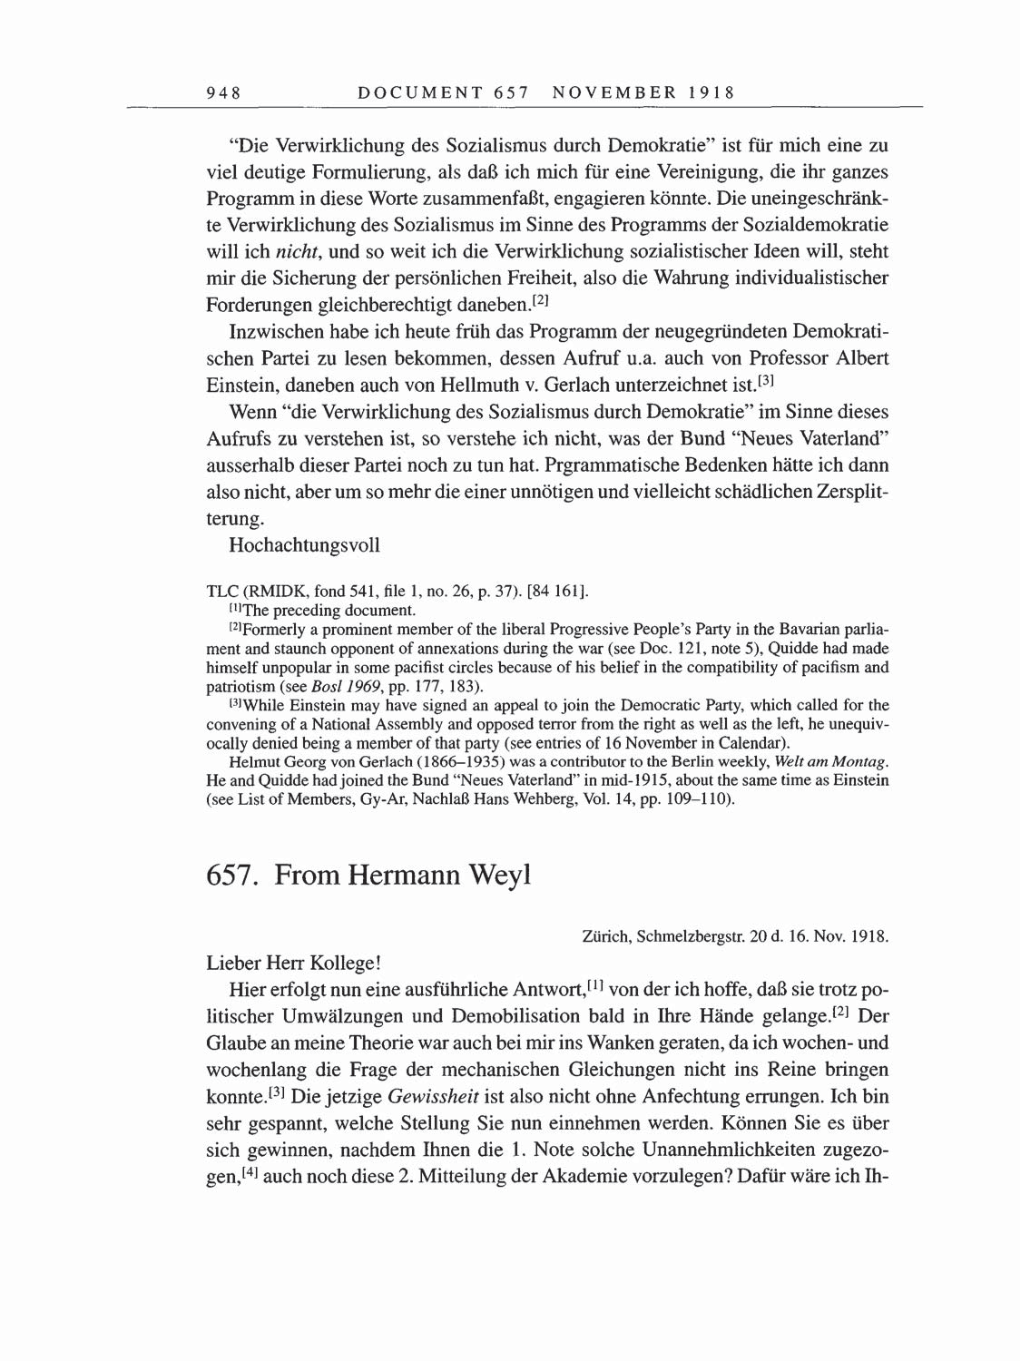 Volume 8, Part B: The Berlin Years: Correspondence 1918 page 948